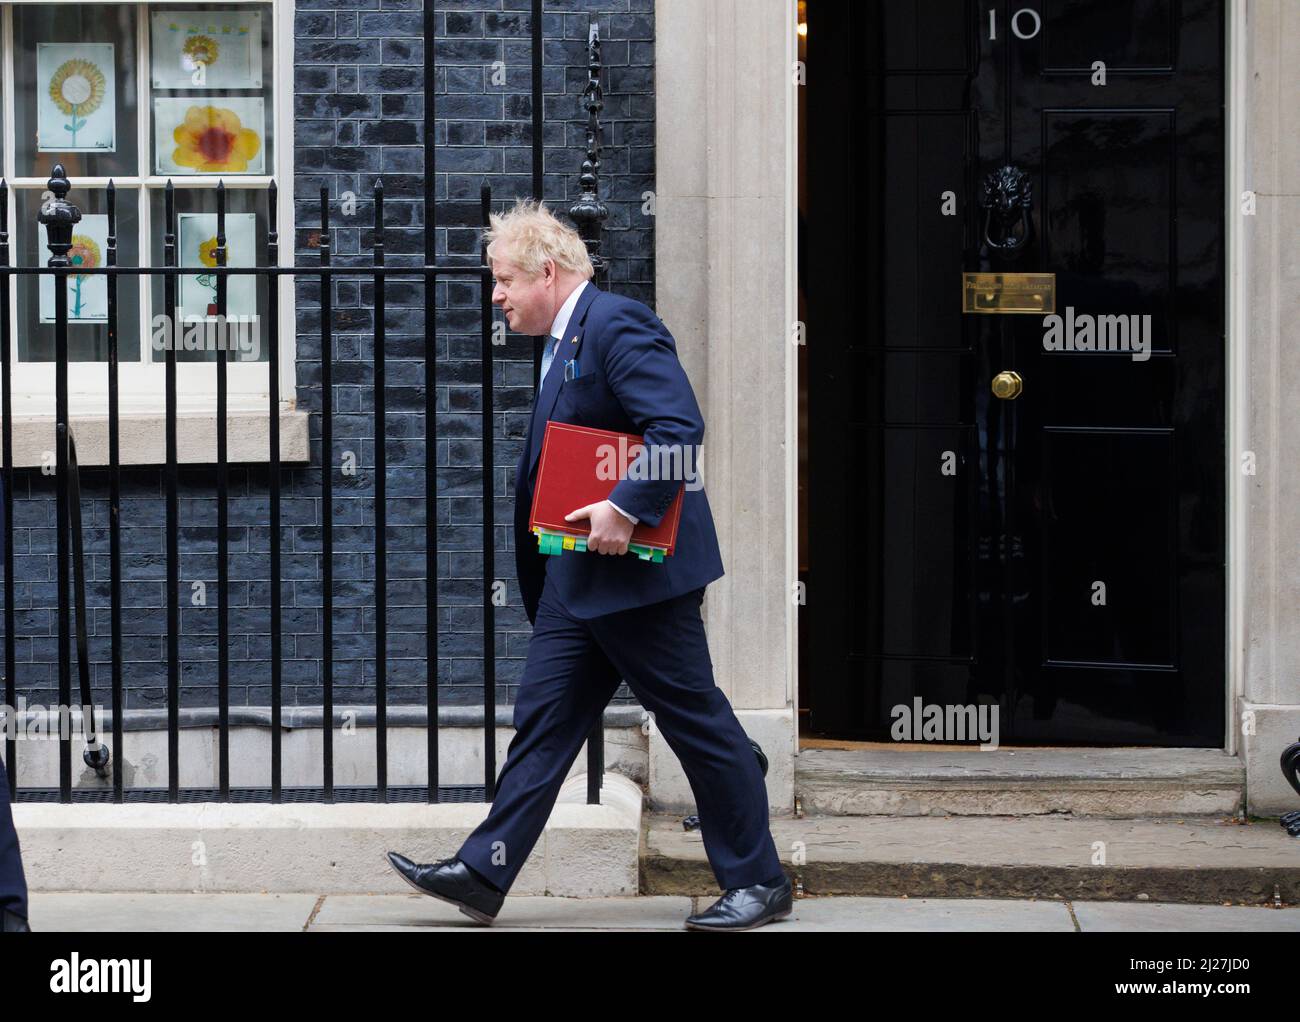 London, UK. 30th Mar, 2022. Prime Minister, Boris Johnson, leaves number 10 Downing Street to go to the Houses of Parliamnet for Prime Ministers Questions. He will face Sir Keir Starmer across the despatch box. Credit: Mark Thomas/Alamy Live News Stock Photo